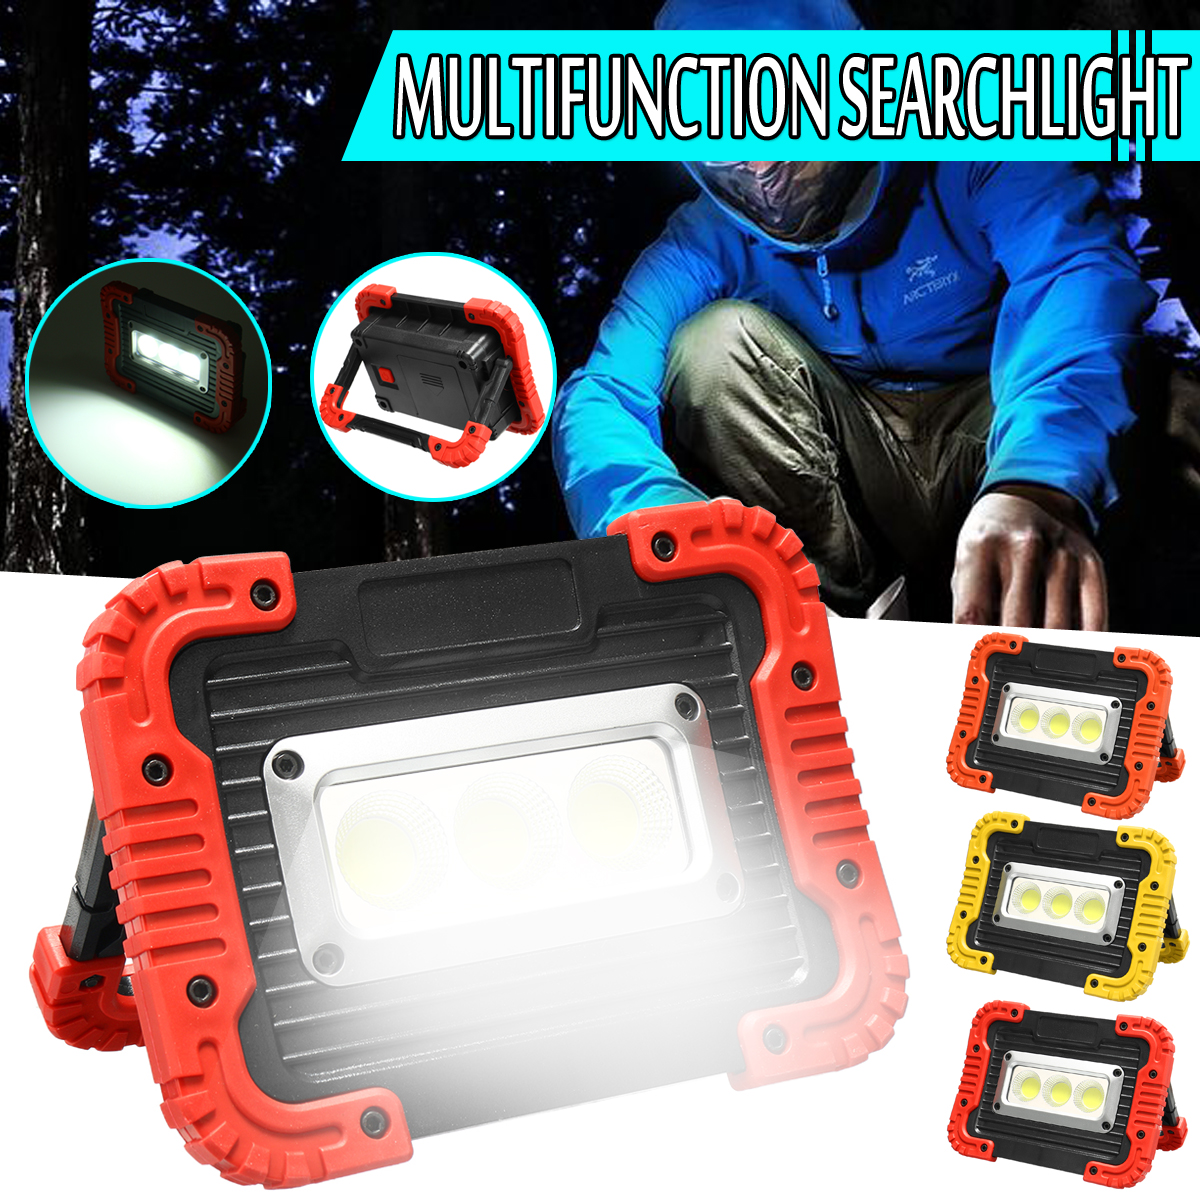 3xCOB-LED-450Lumens-3Modes-Waterproof-Camping-Lamp-Flashlight-Foldable-Work-Light-Searchlight-For-Ni-1633893